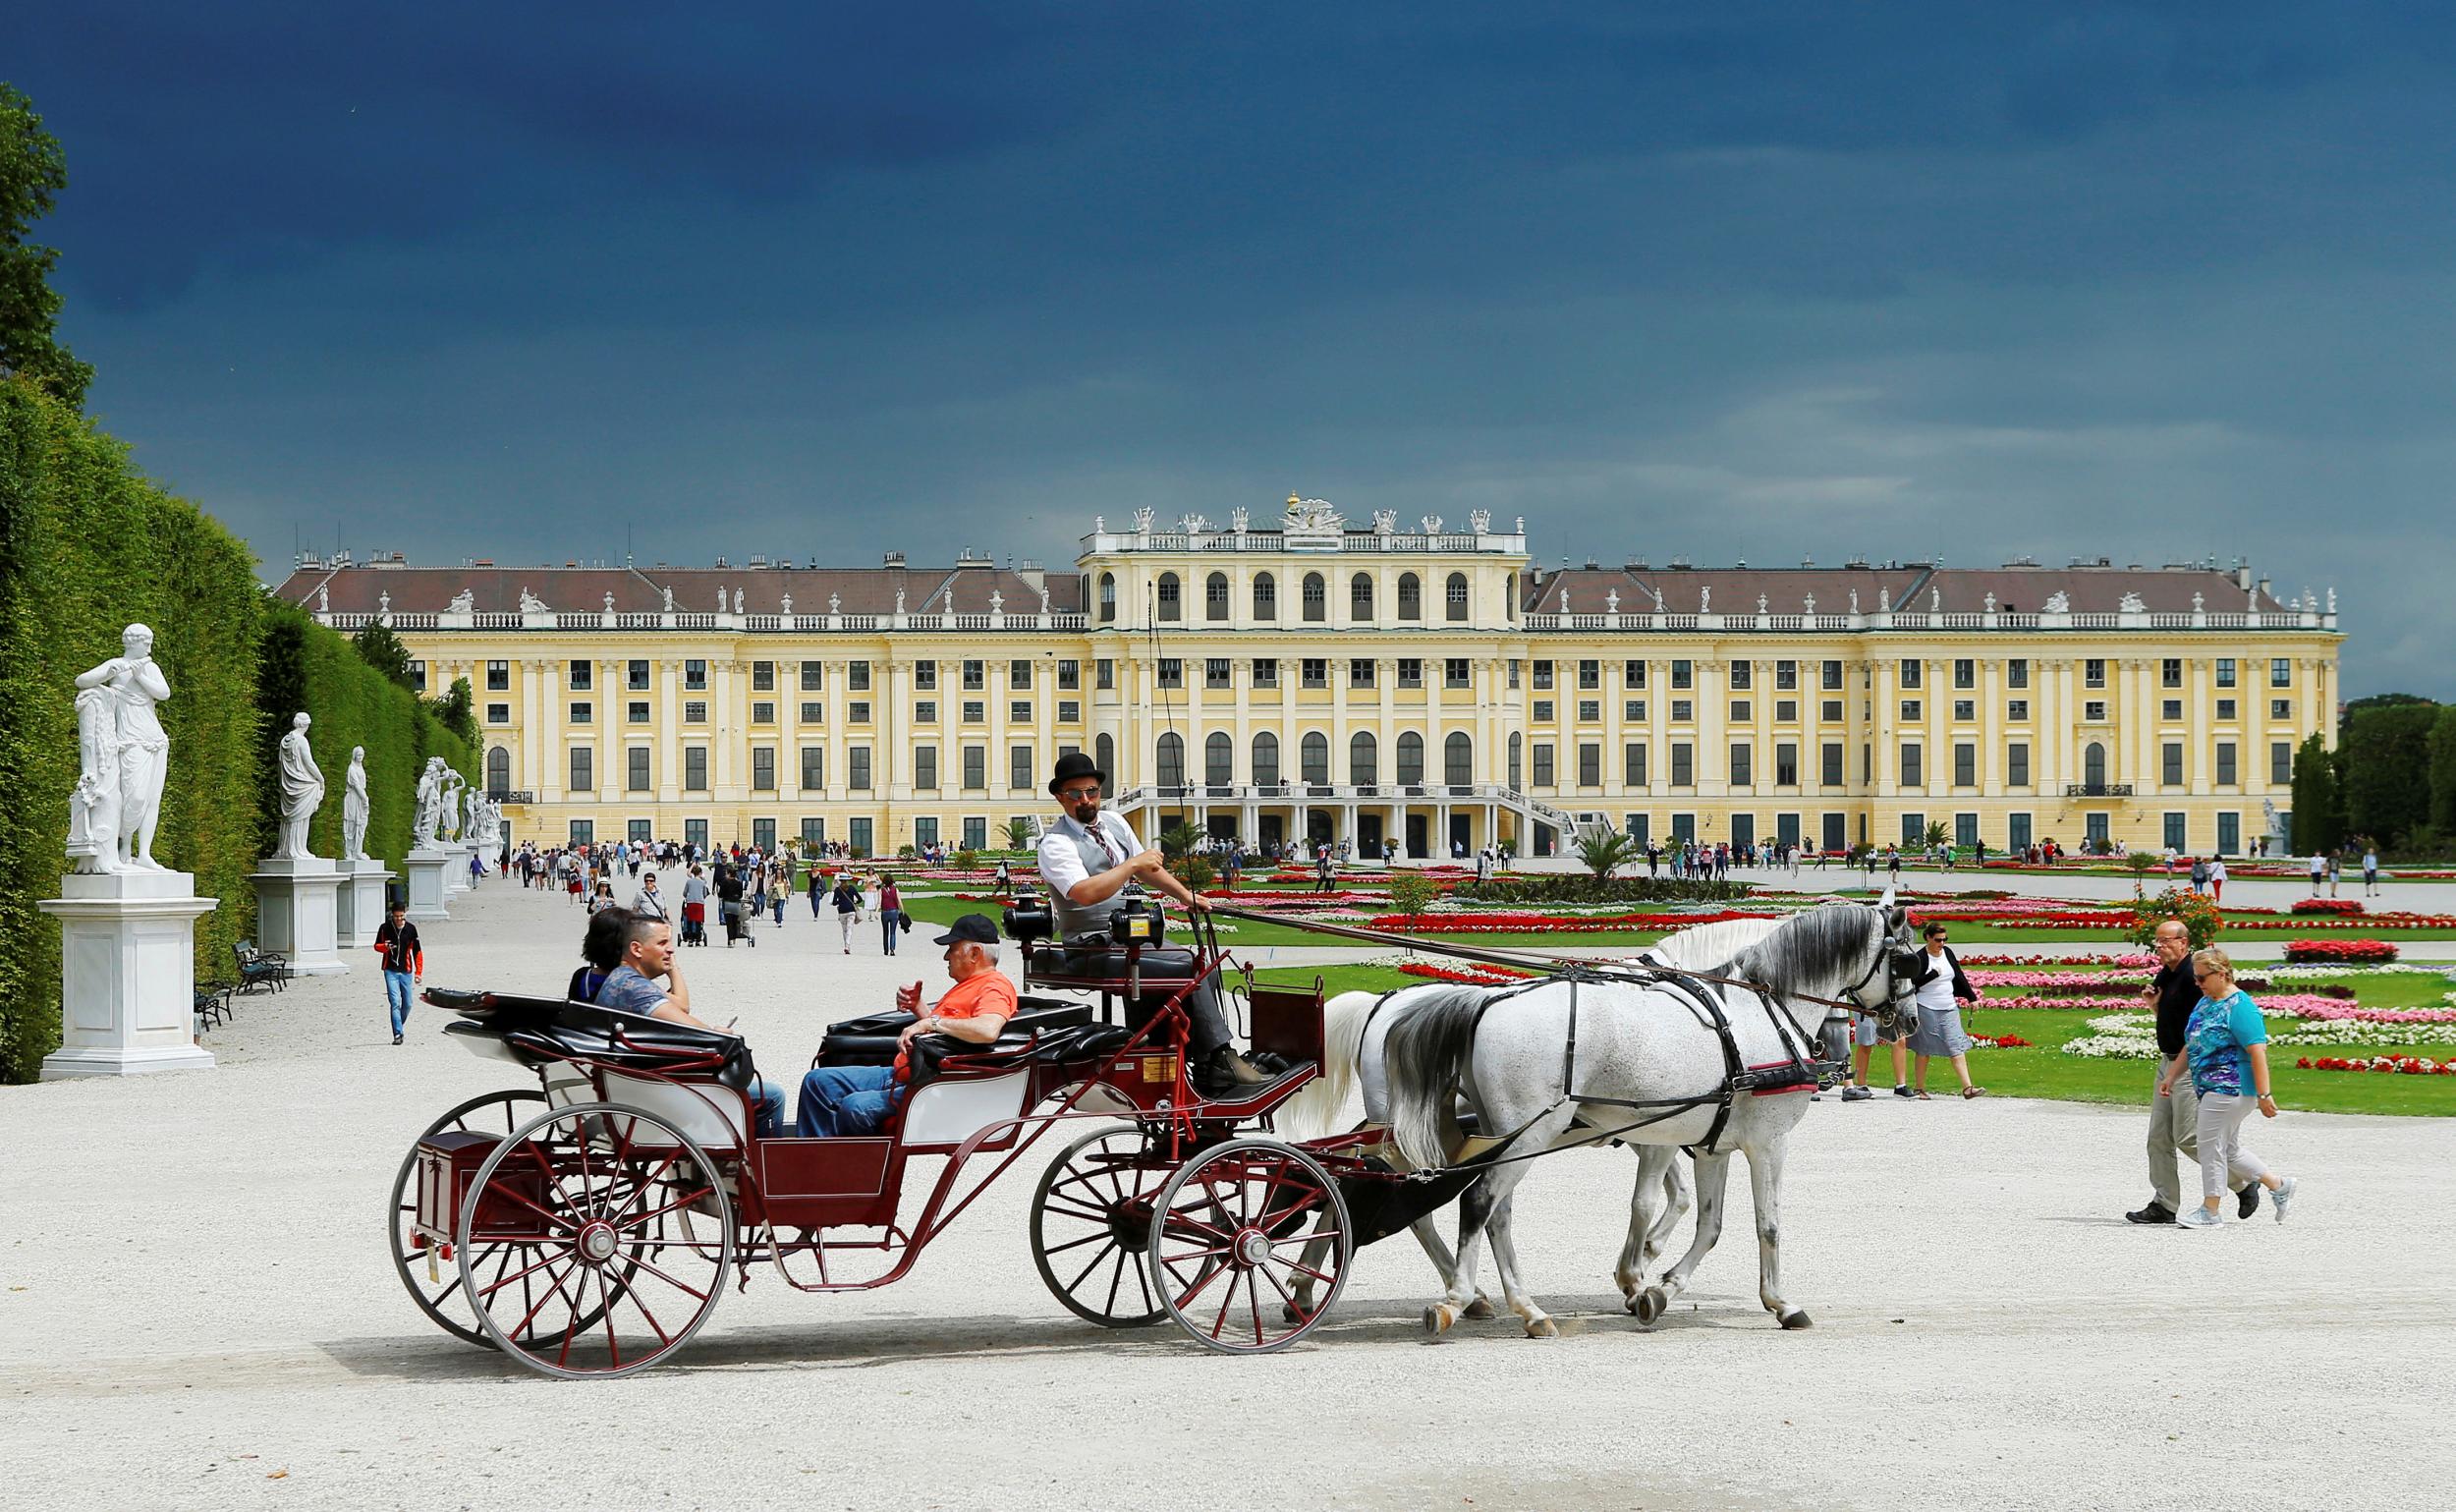 A traditional Fiaker horse carriage passes the imperial Schoenbrunn palace in Vienna, Austria